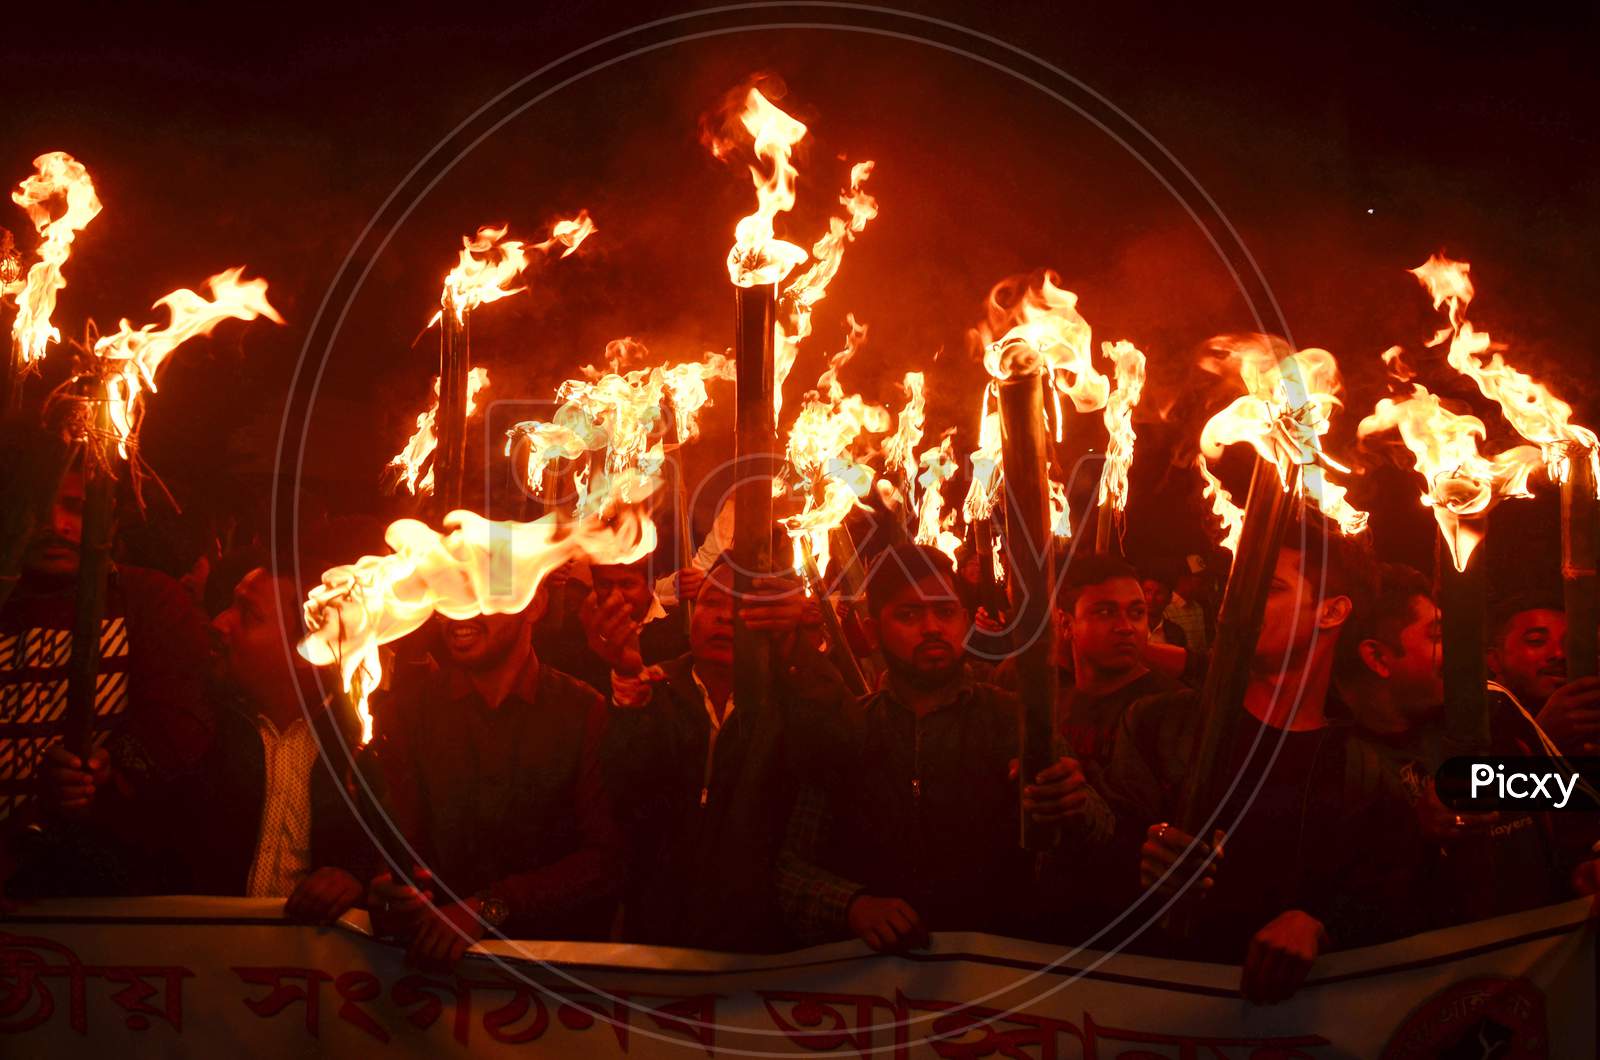 Activists of All Assam Students Union (AASU) along with 30 indigenous organizations take out a torch light procession